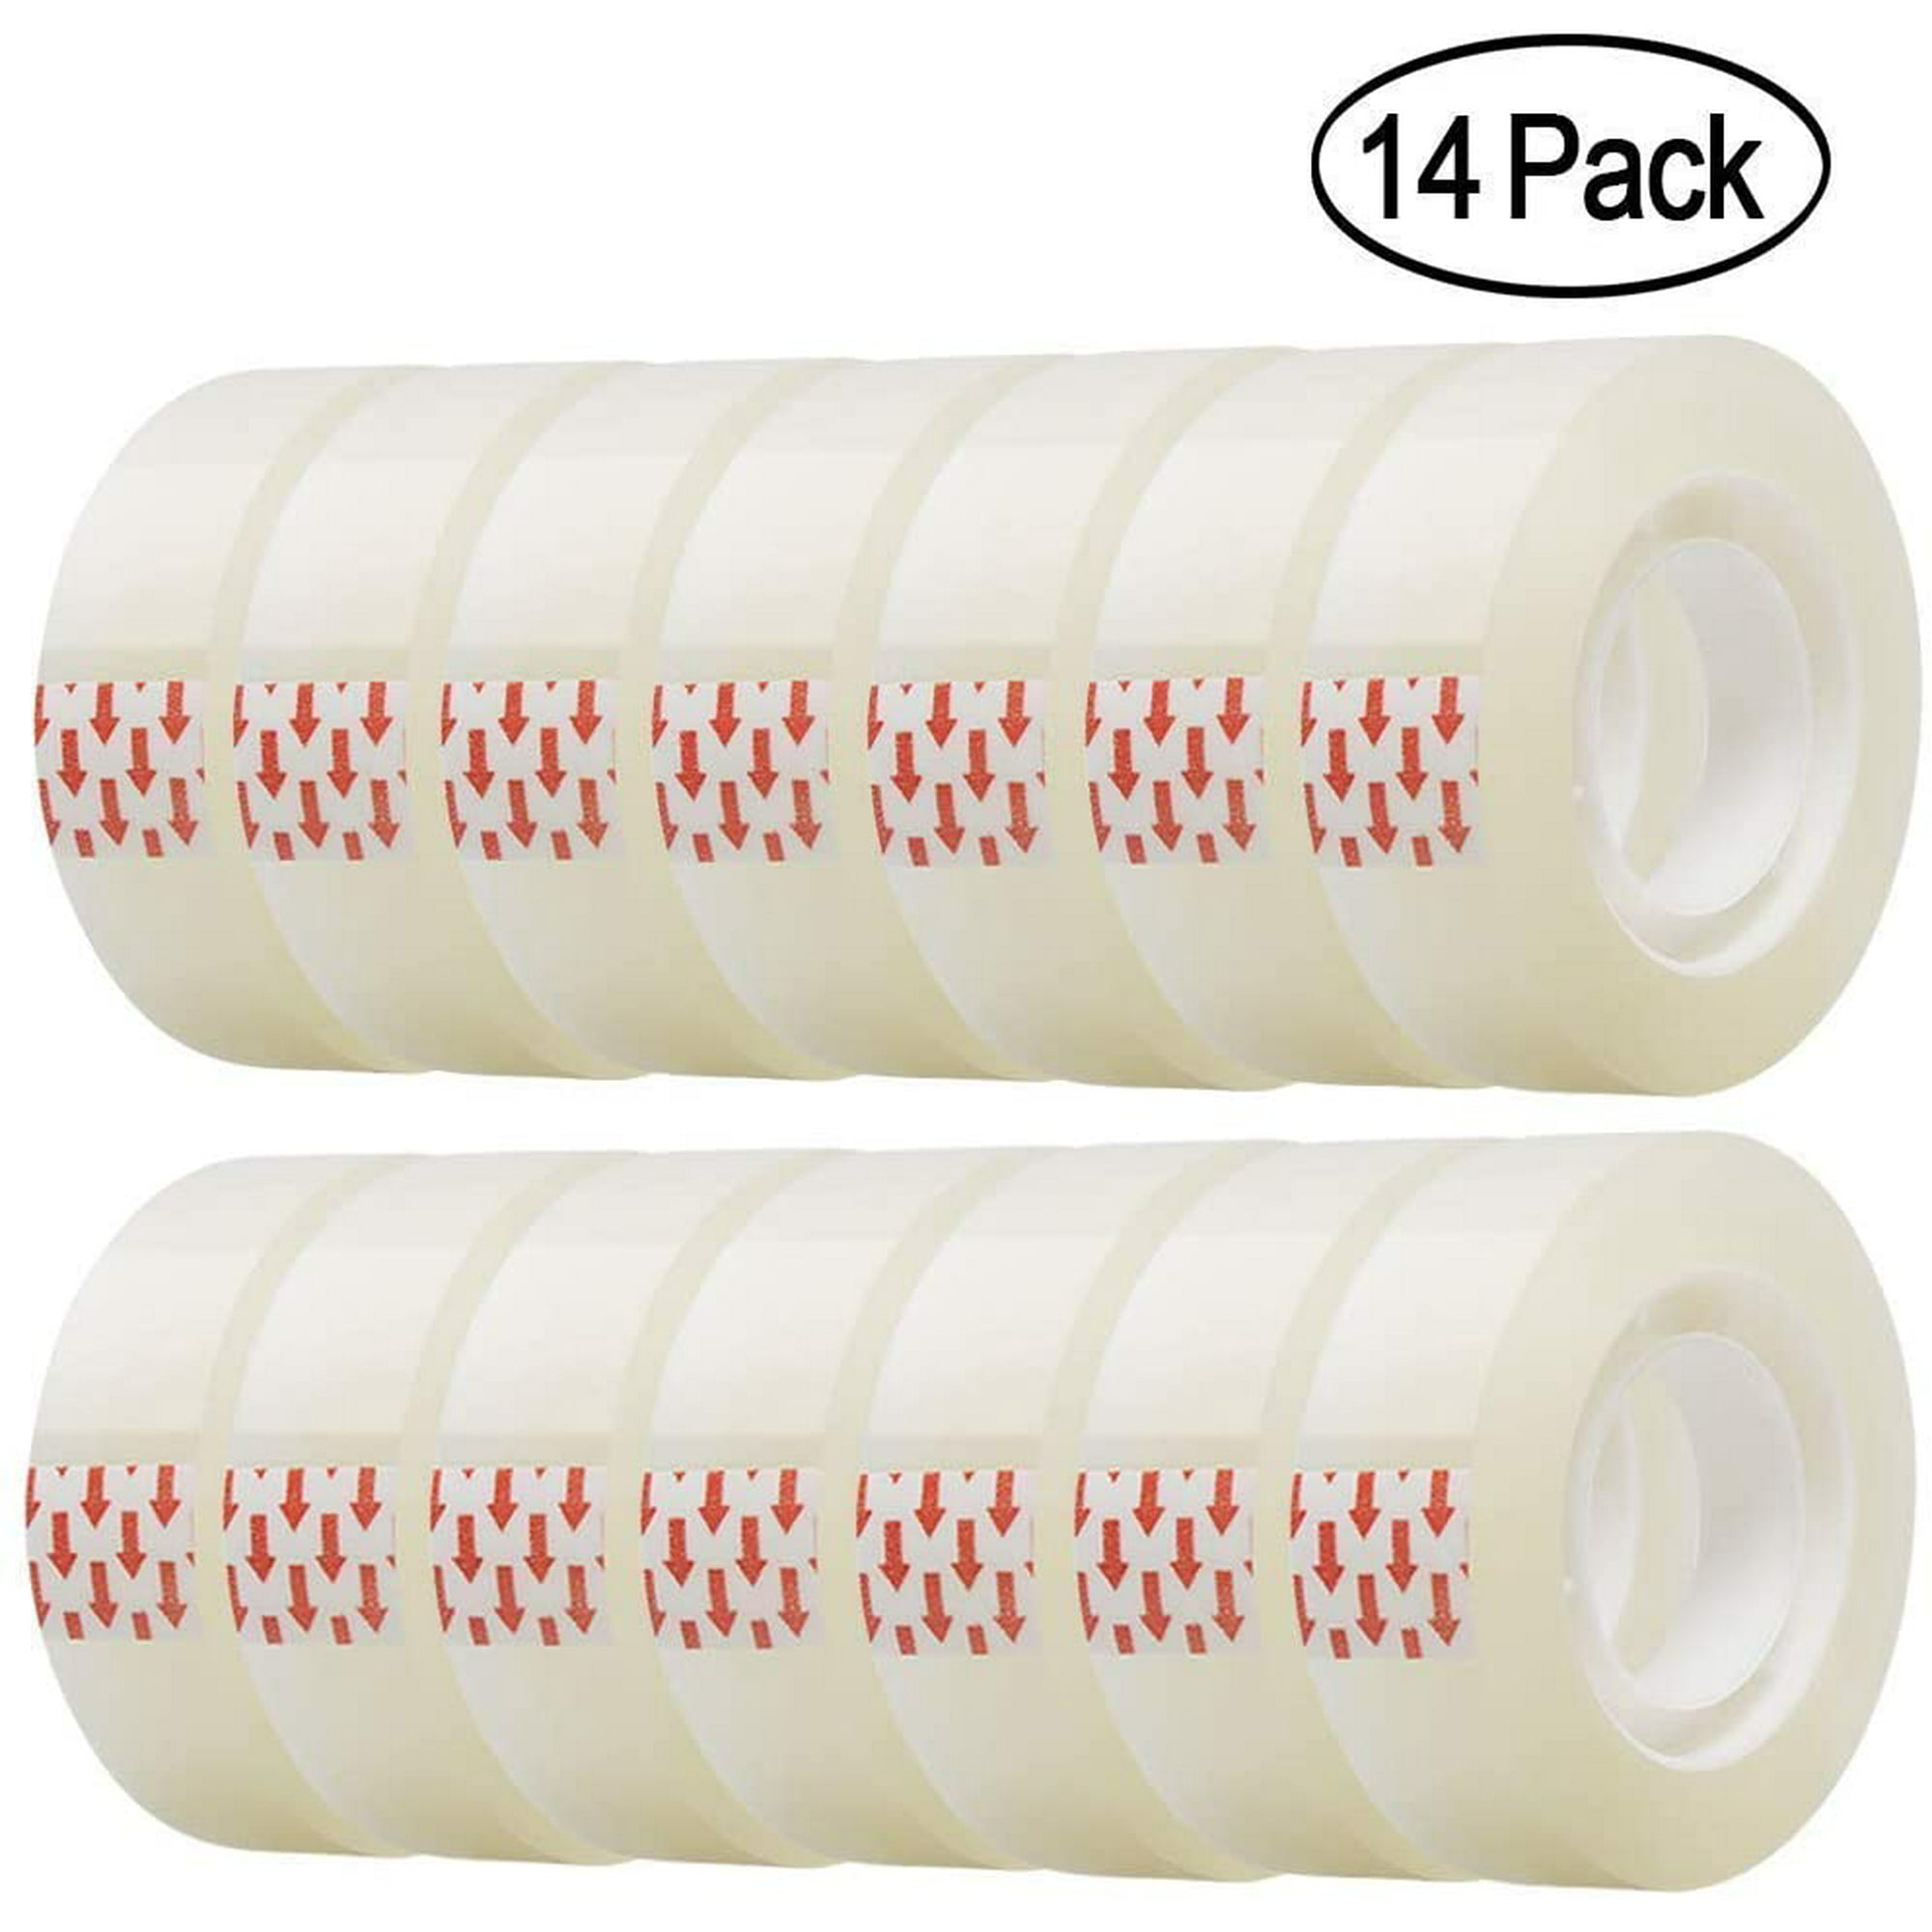 4 Pcs Transparent Tape Clear Tape 3/4 x1200"Tape Refill Roll for Office School 